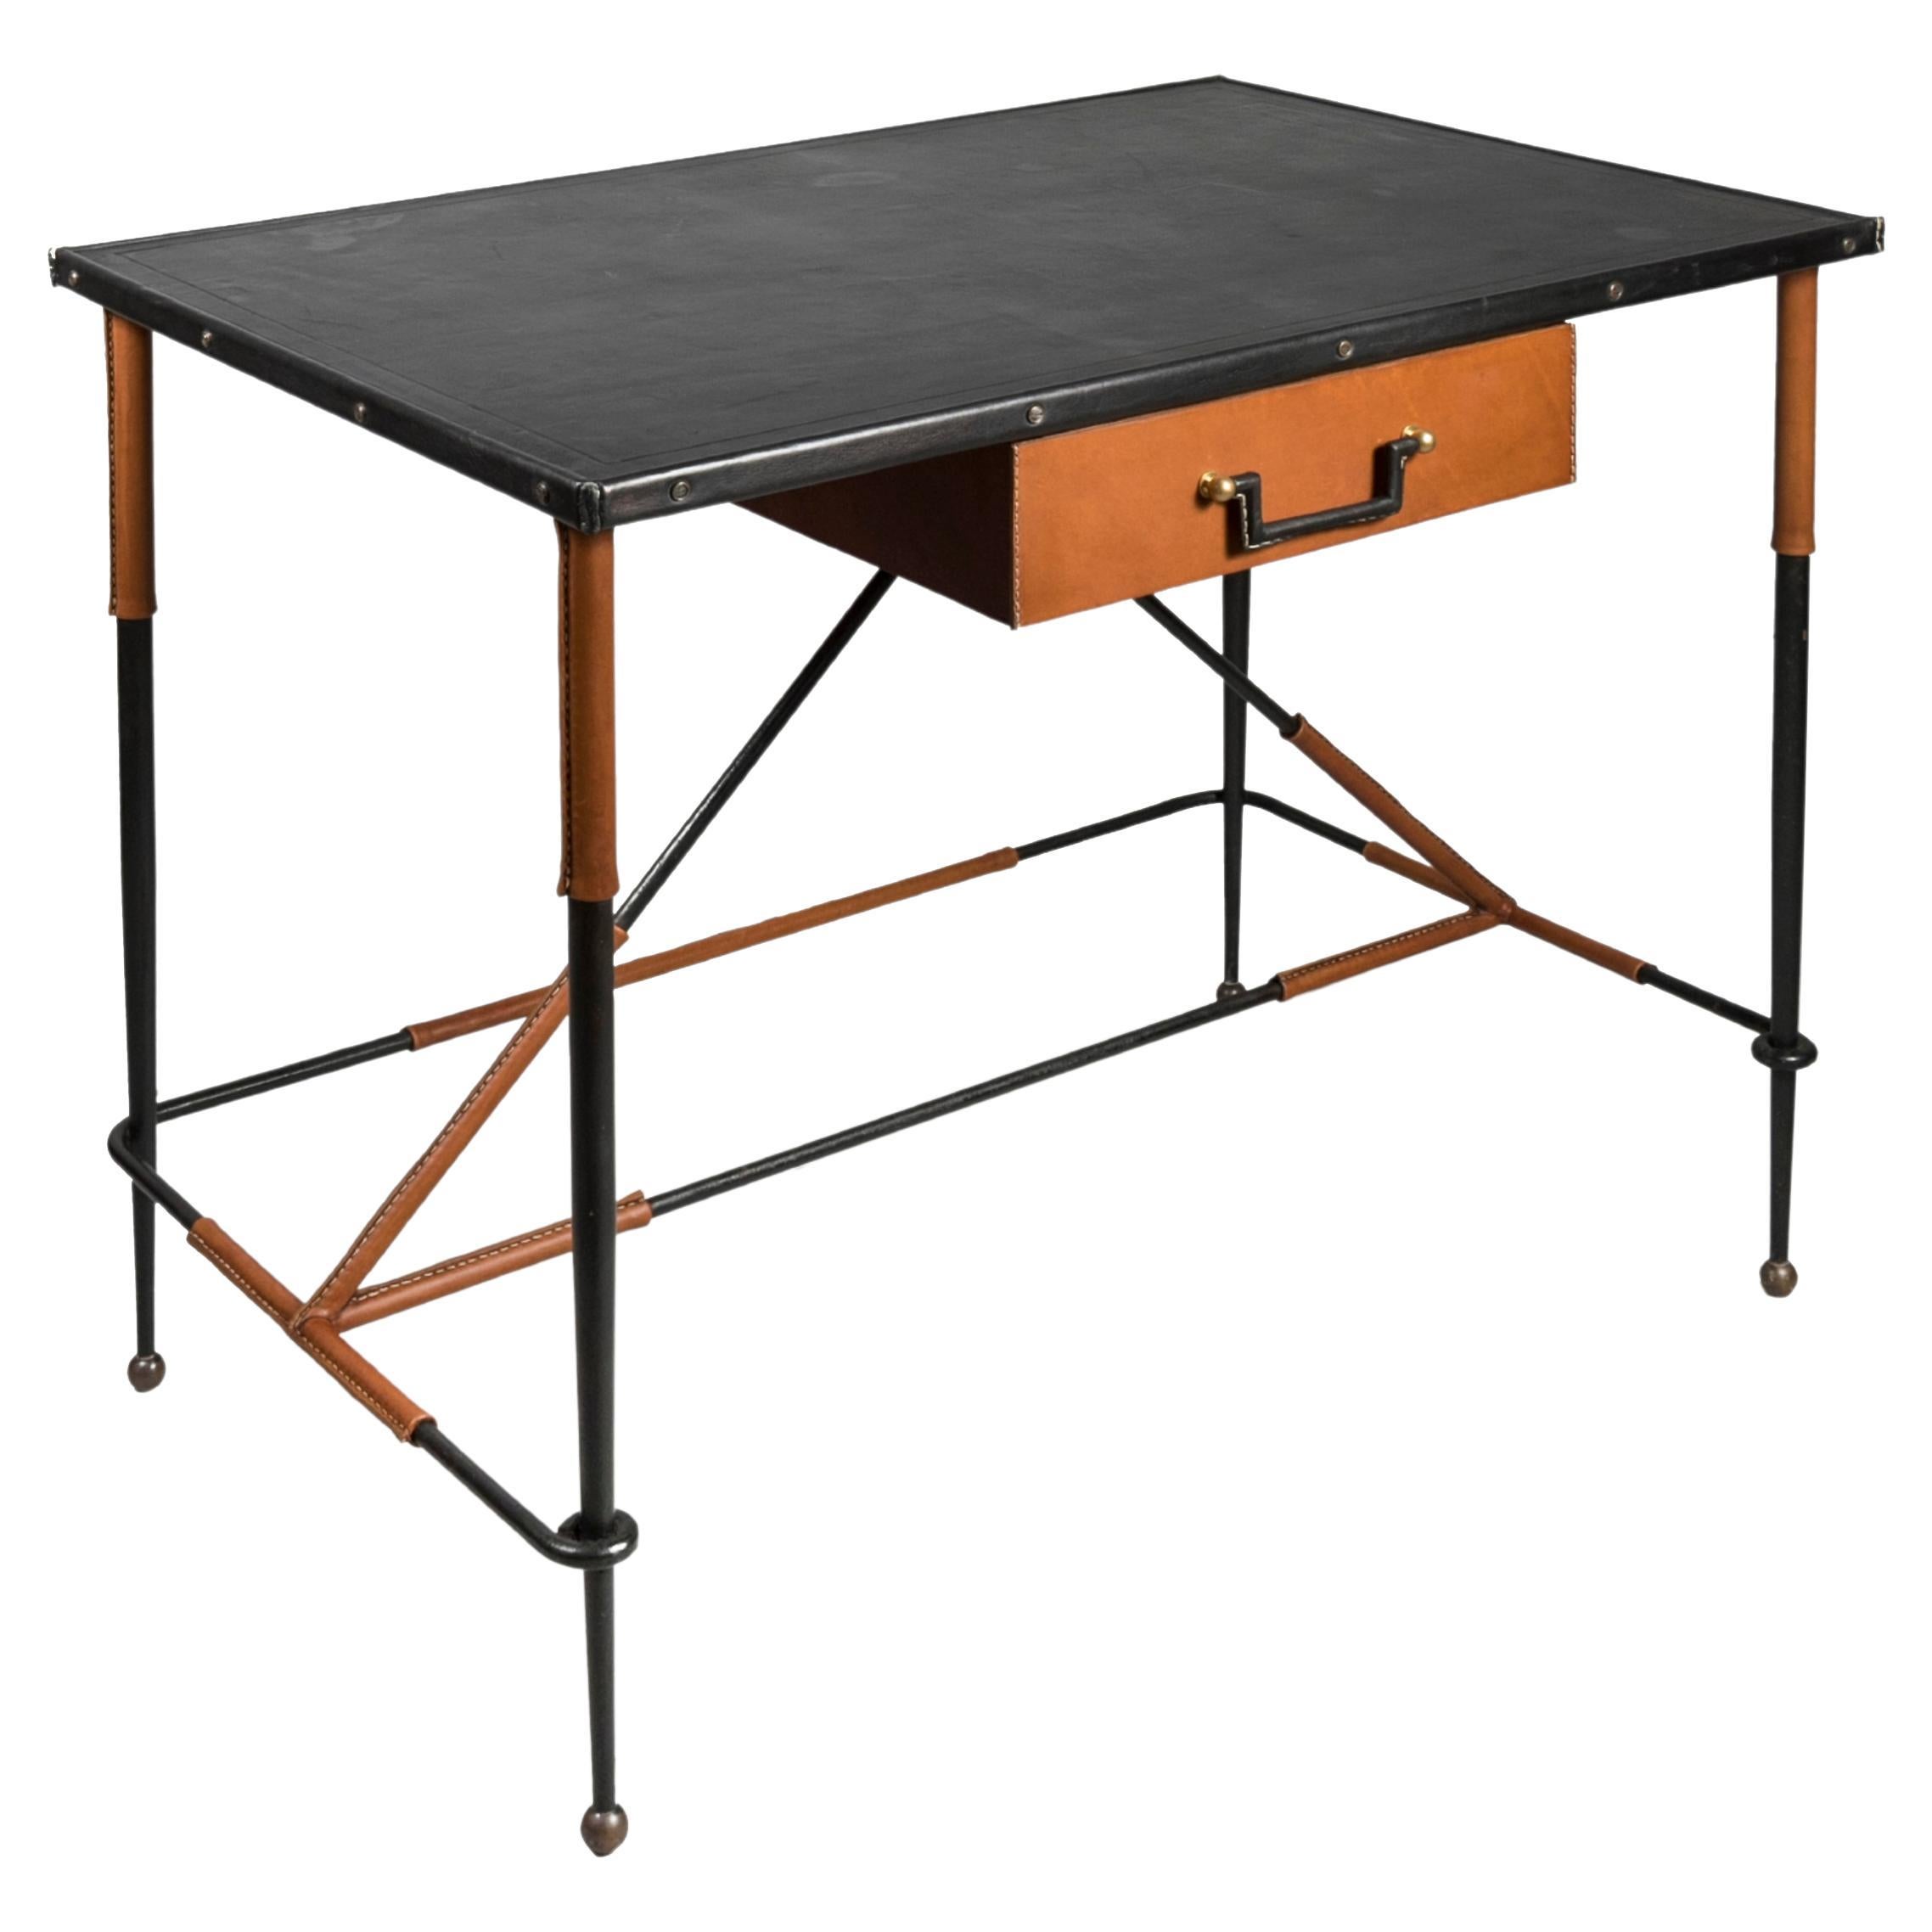 1950's Stitched Leather Desk by Jacques Adnet